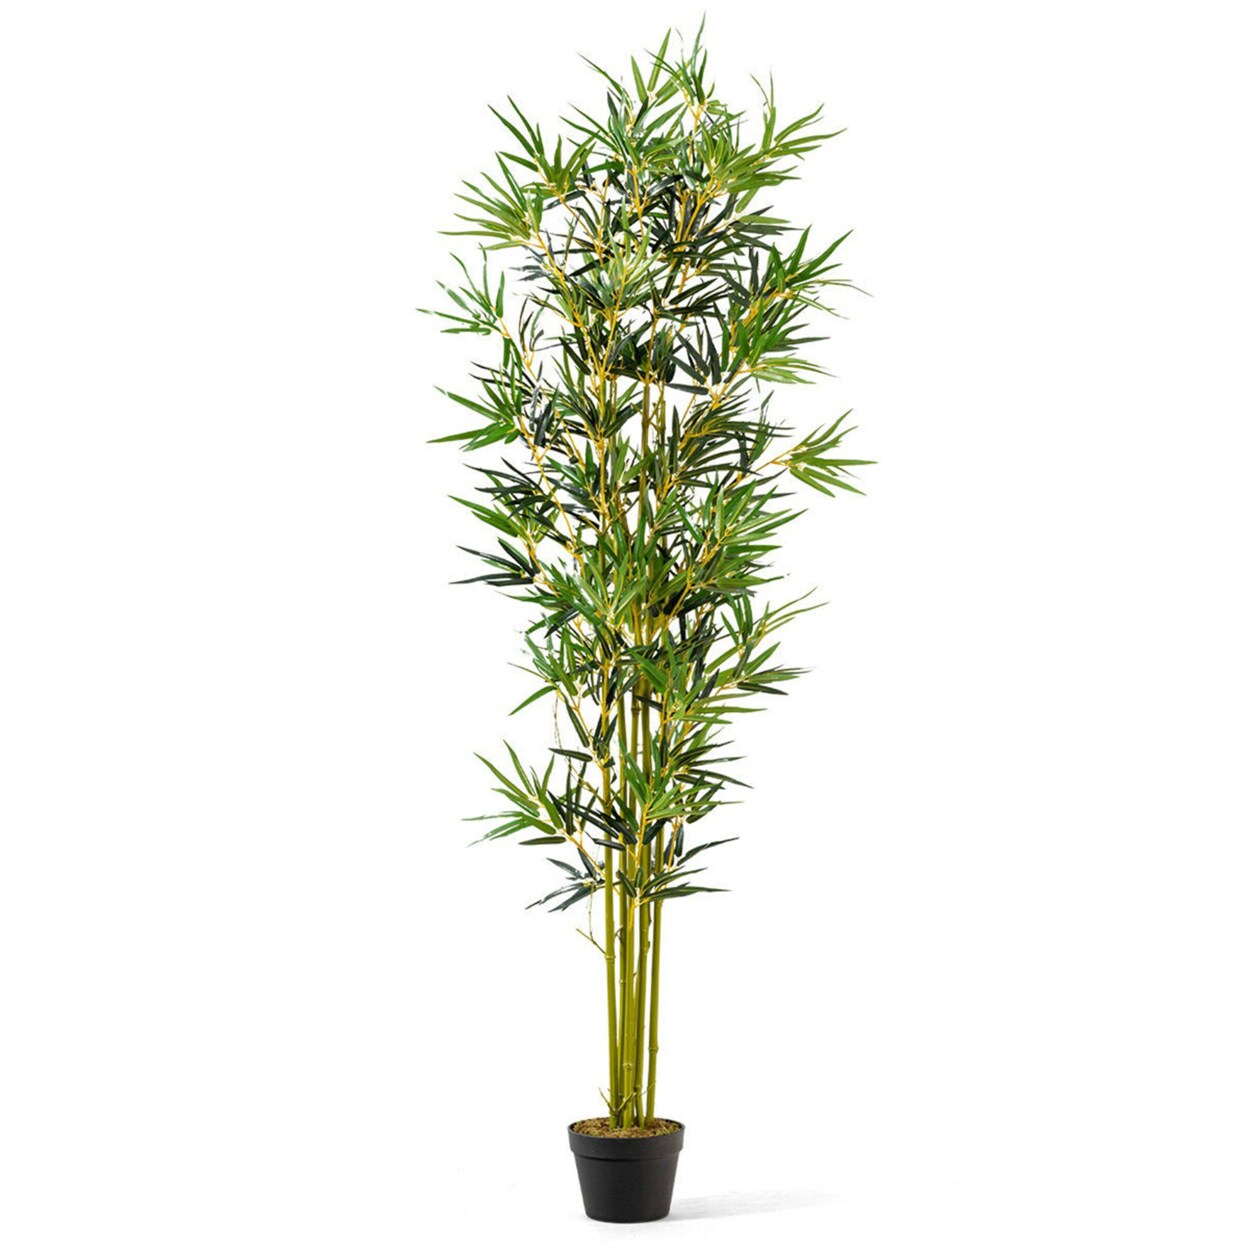 Gymax 6Ft Bamboo Silk Tree Artificial Greenery Plant Home Office Decoration